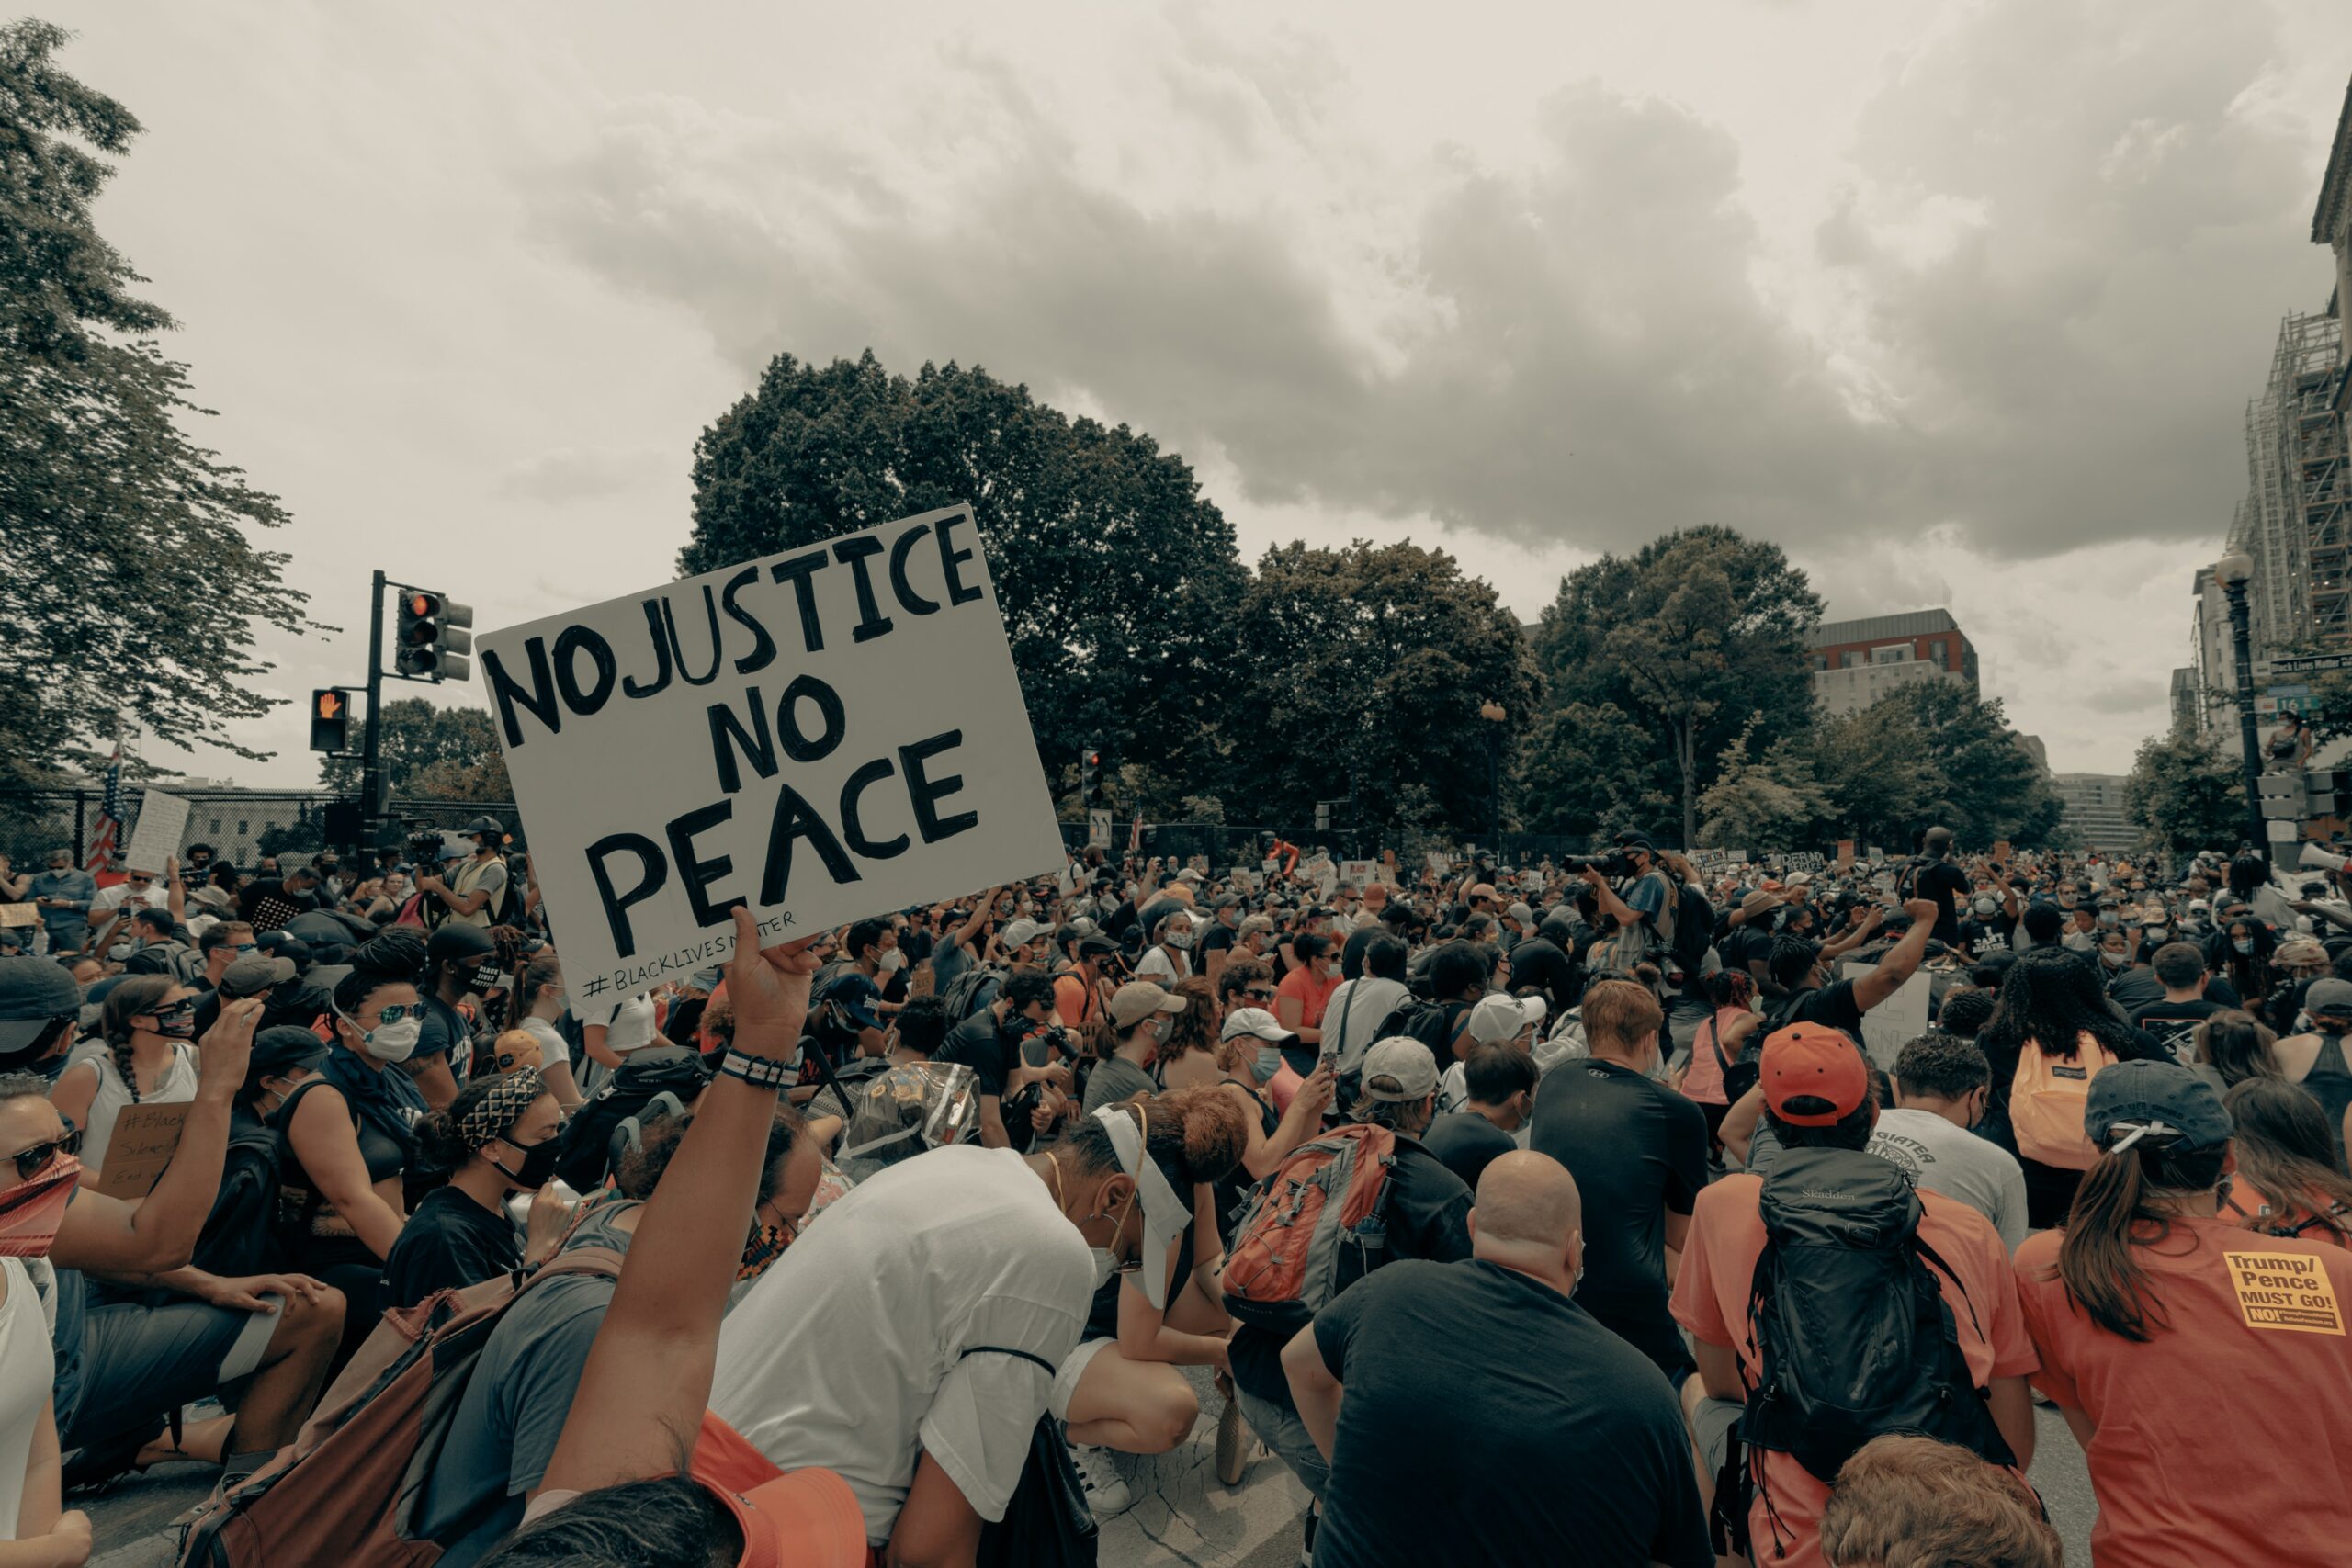 A crowd of people at a protest kneel on the ground. A prominent sign read, "No justice, no peace."